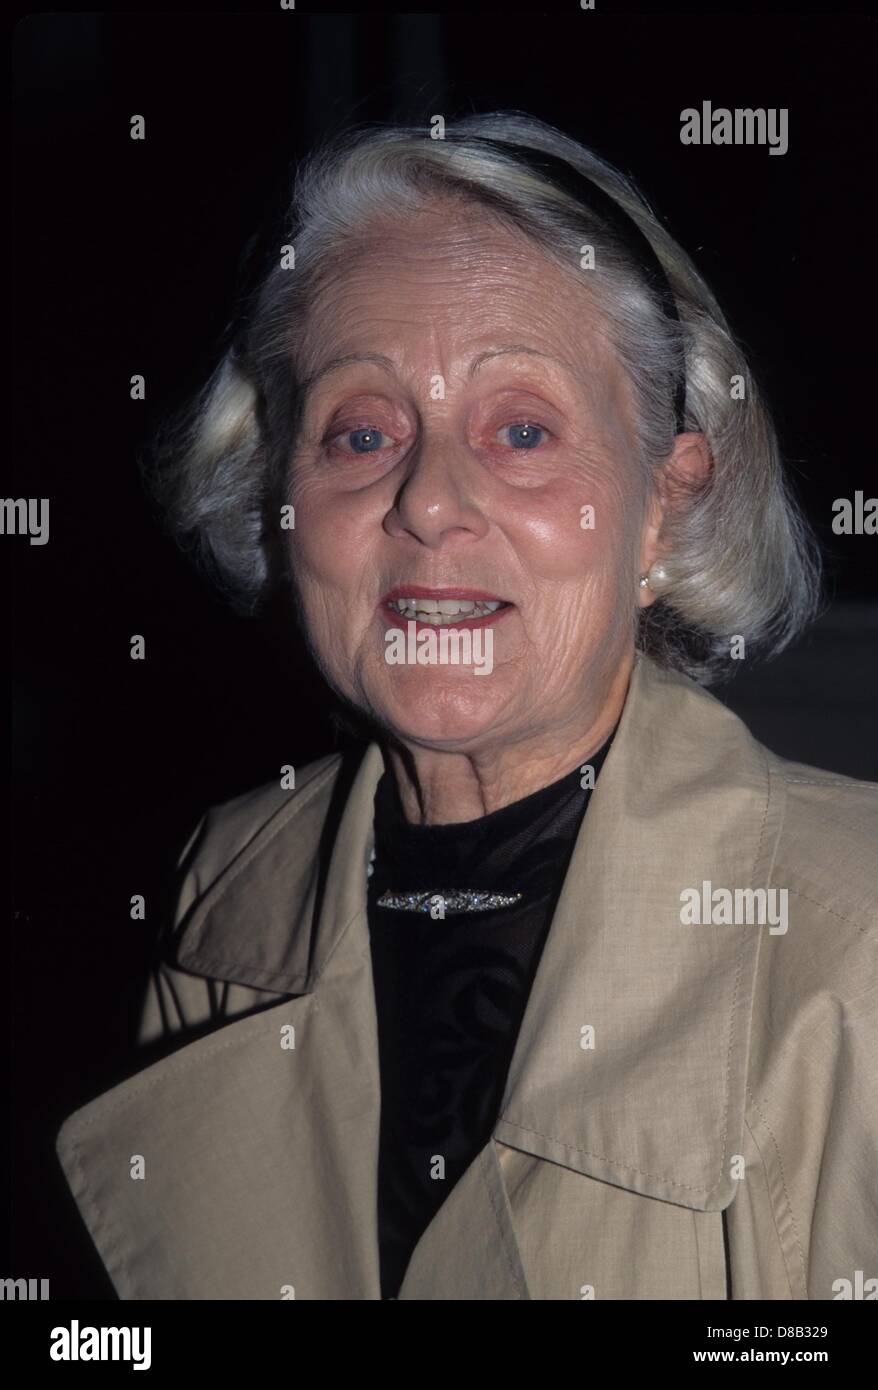 Jean Harris High Resolution Stock Photography and Images - Alamy